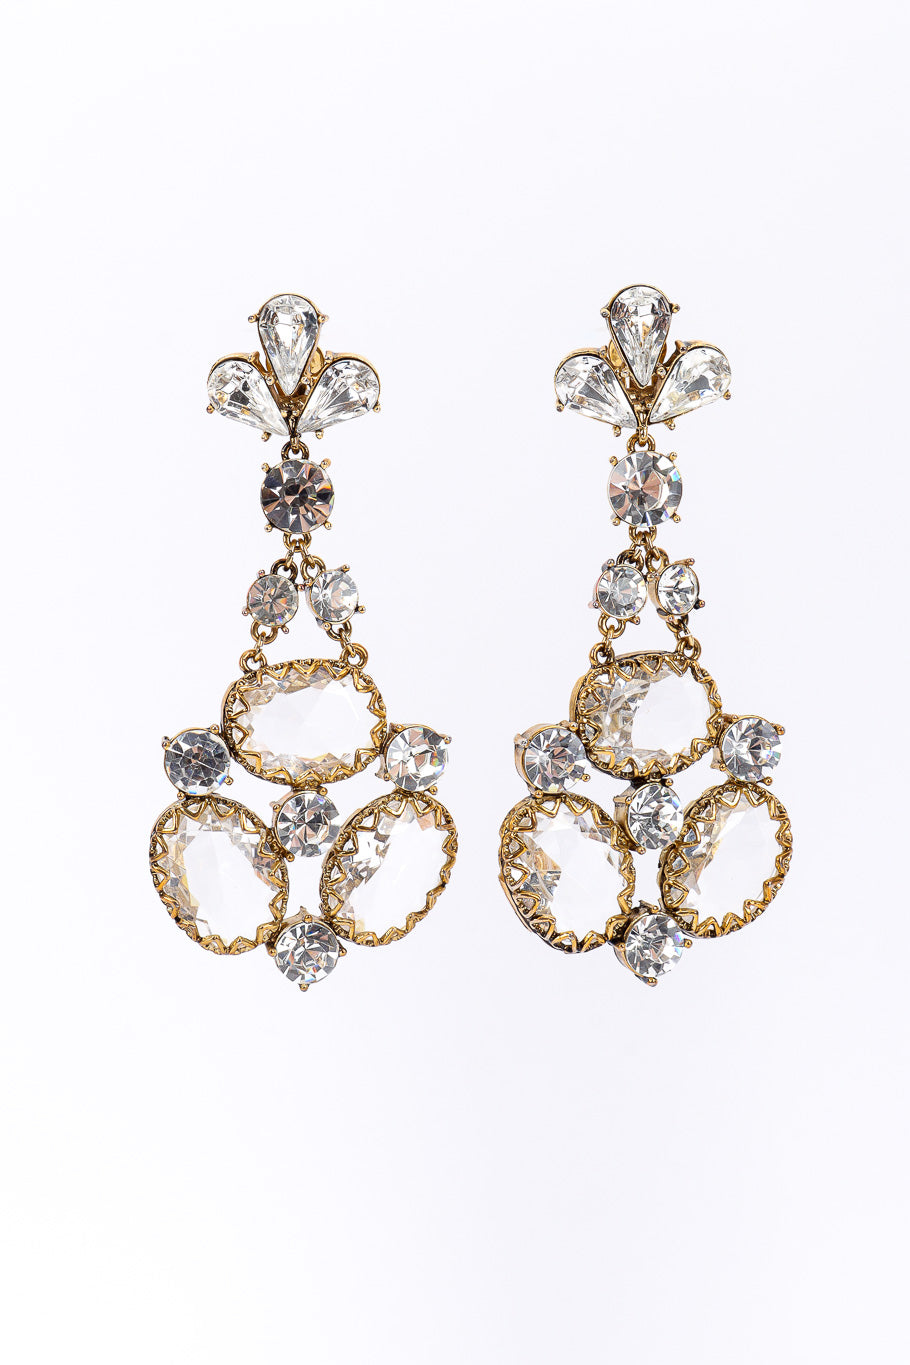 Vintage Crystal Cluster Chandelier Earrings front view on white background @Recessla